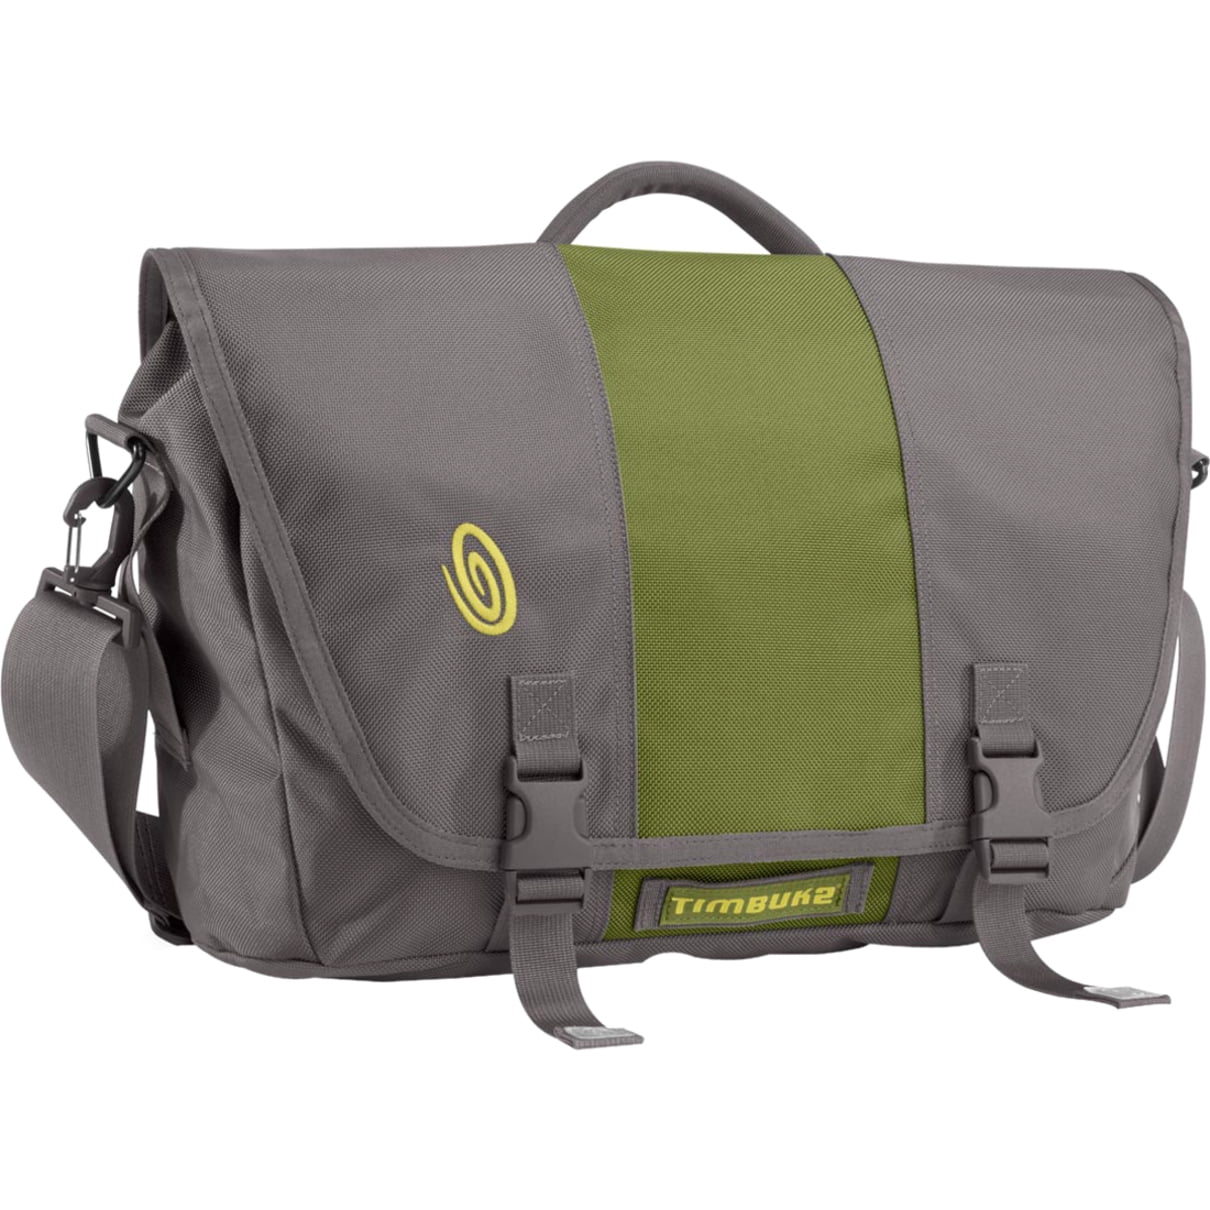 Timbuk2 Commute Carrying Case (Messenger) Apple iPad Notebook, Pen, Bottle,  Cellular Phone, Cable, Accessories, Gunmetal, Algae Green 